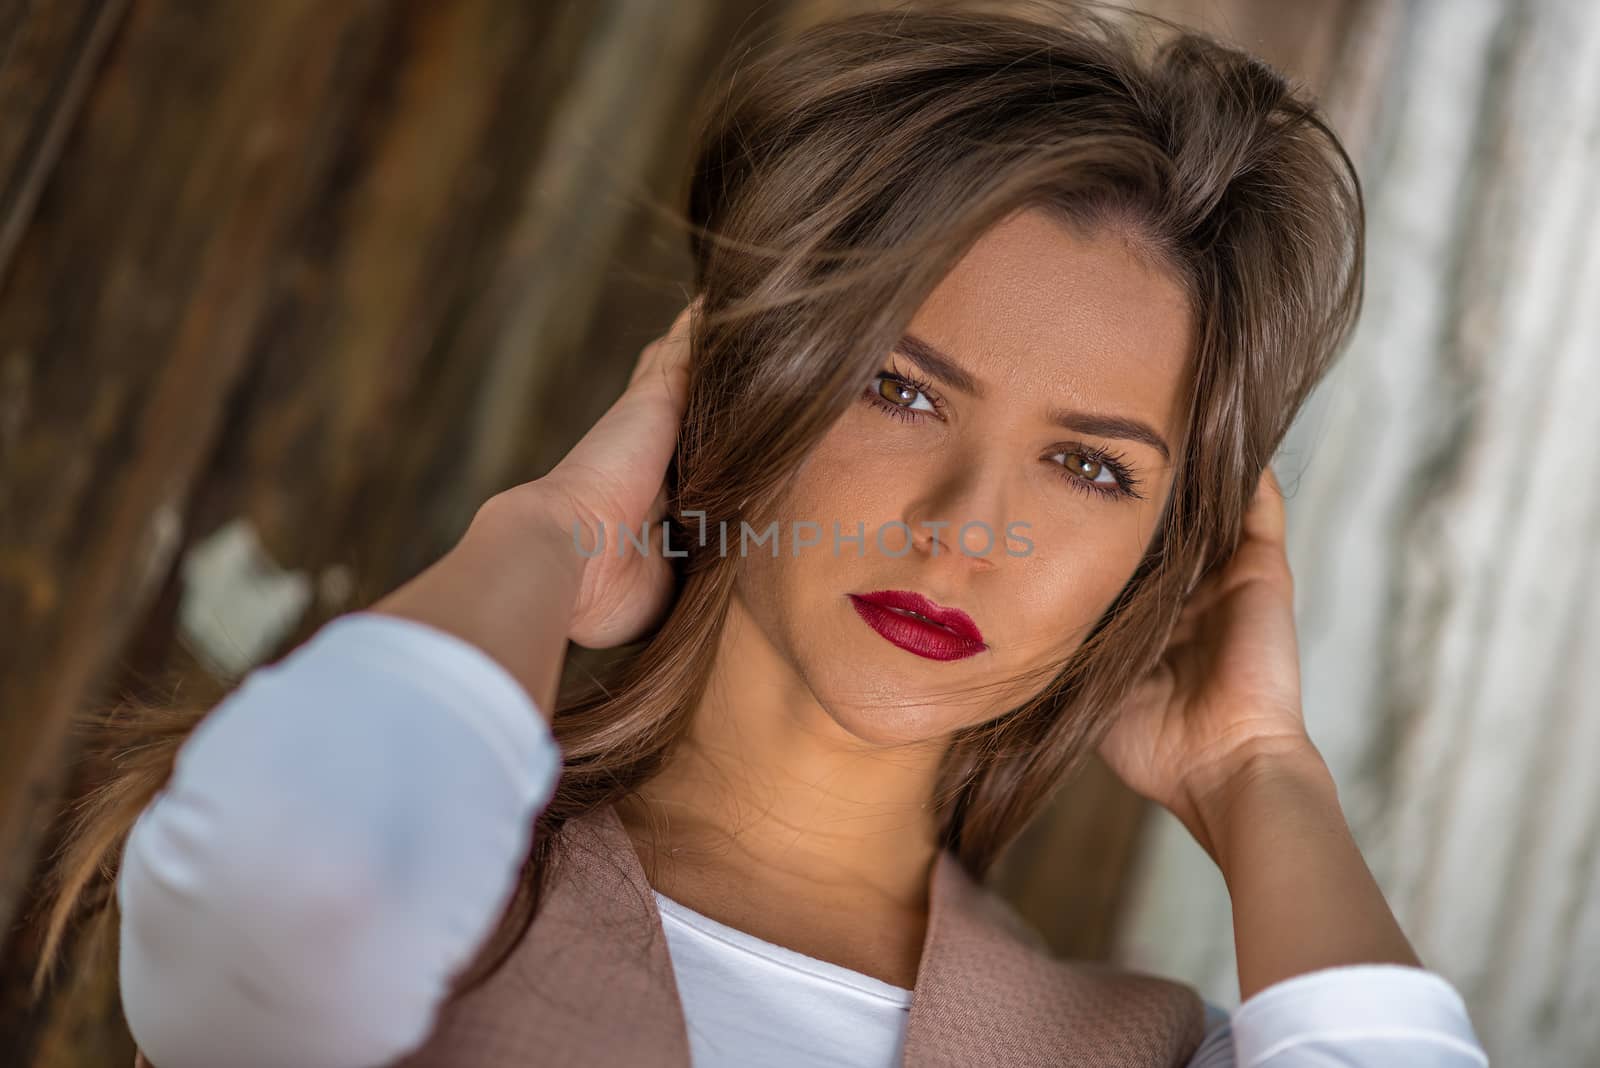 Young woman with red lips and brown hair is posing against the rustic wall. Shallow depth of field, dutch angle.